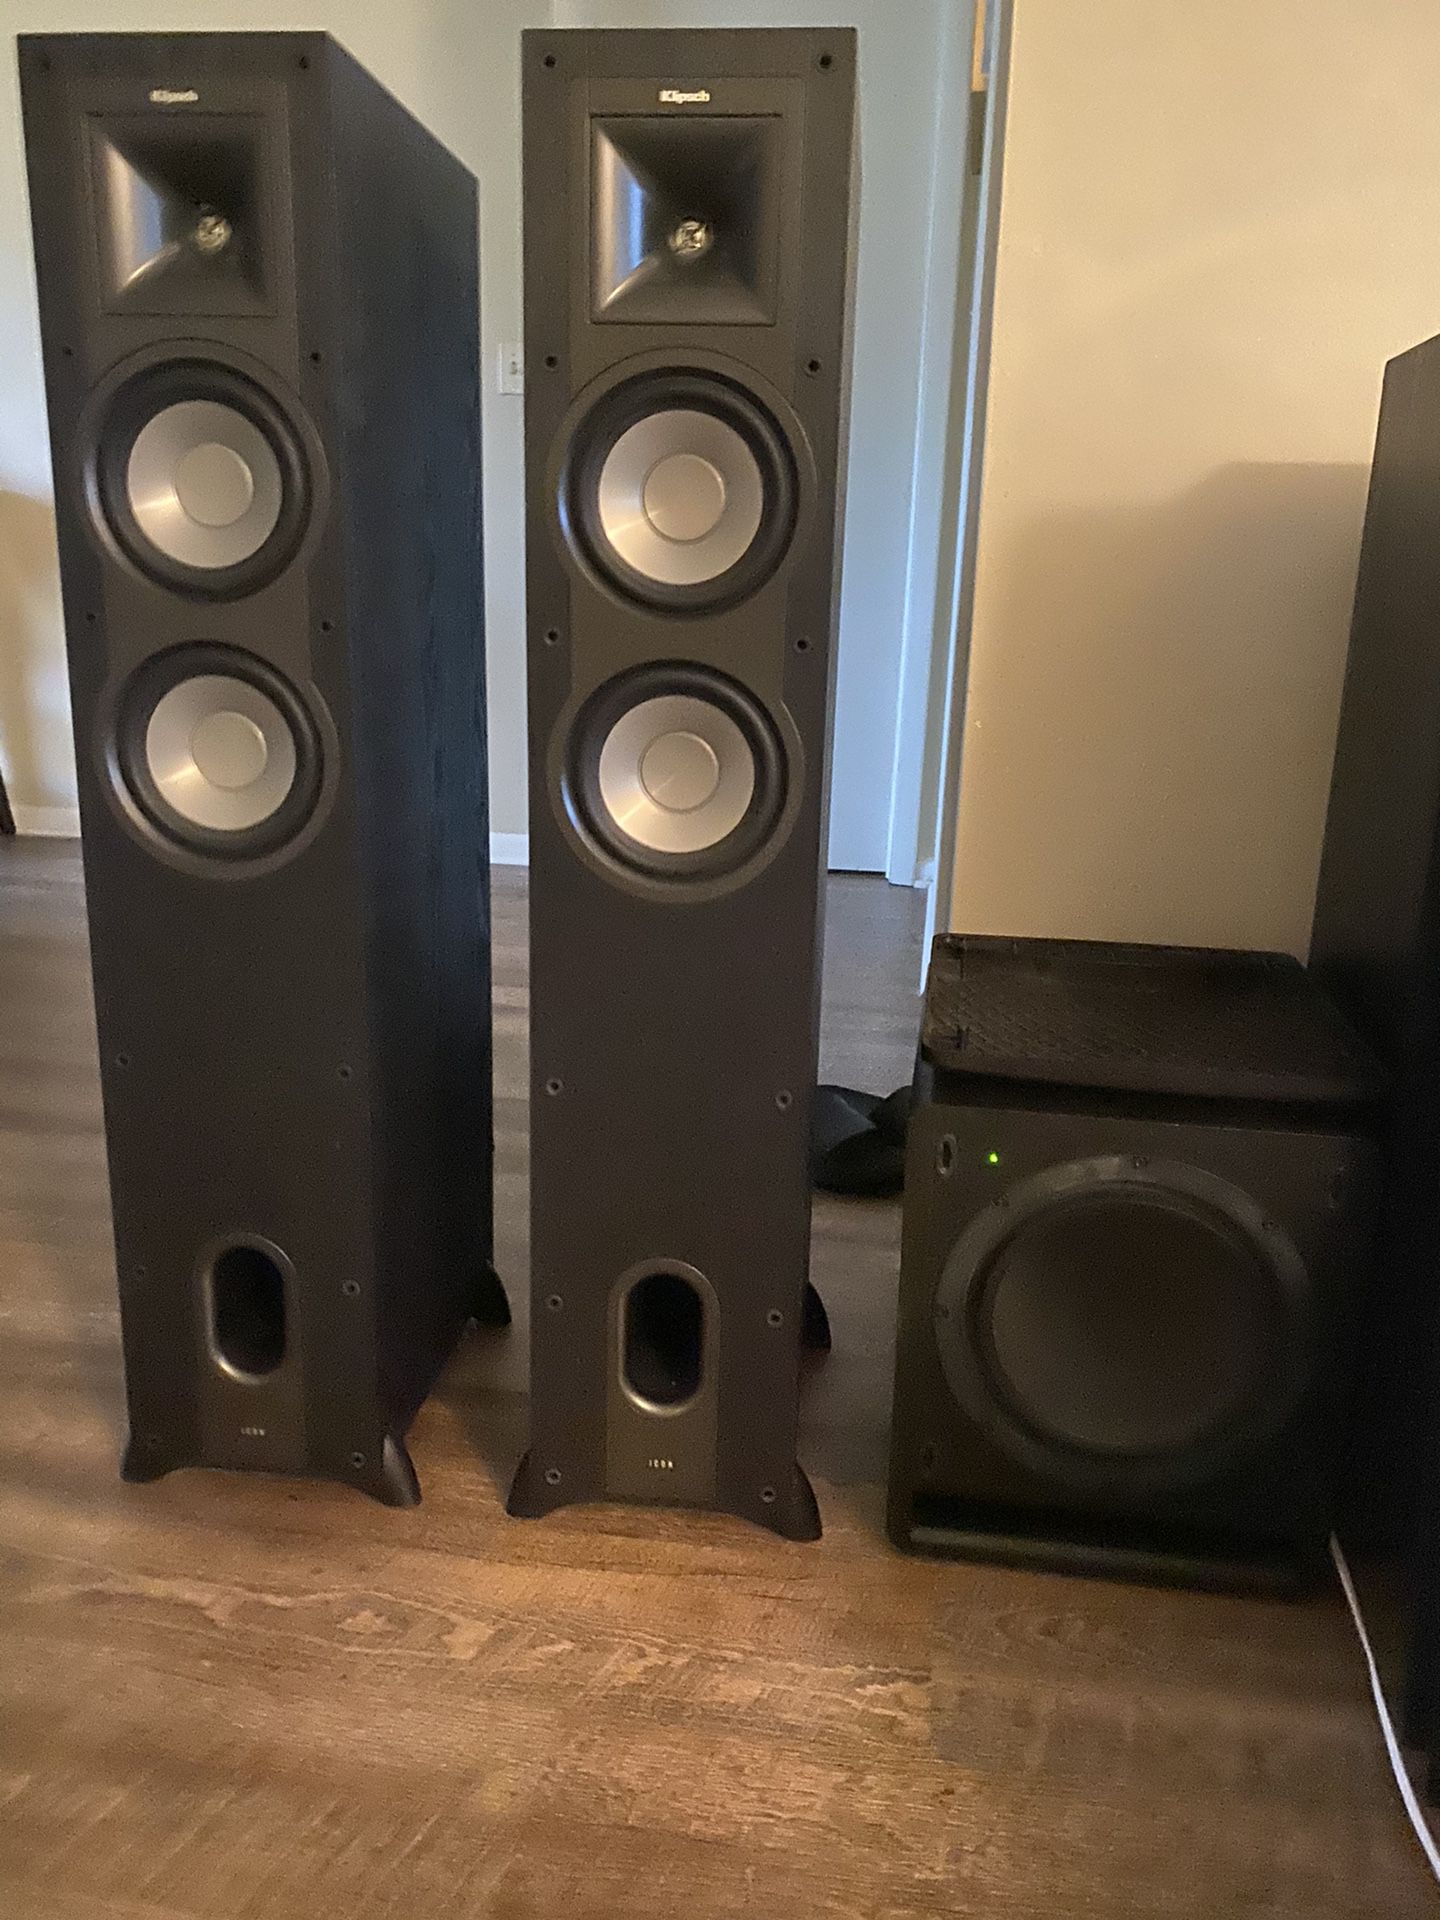 Klipsch Towers and Klipsch Subwoofer-Great Condition